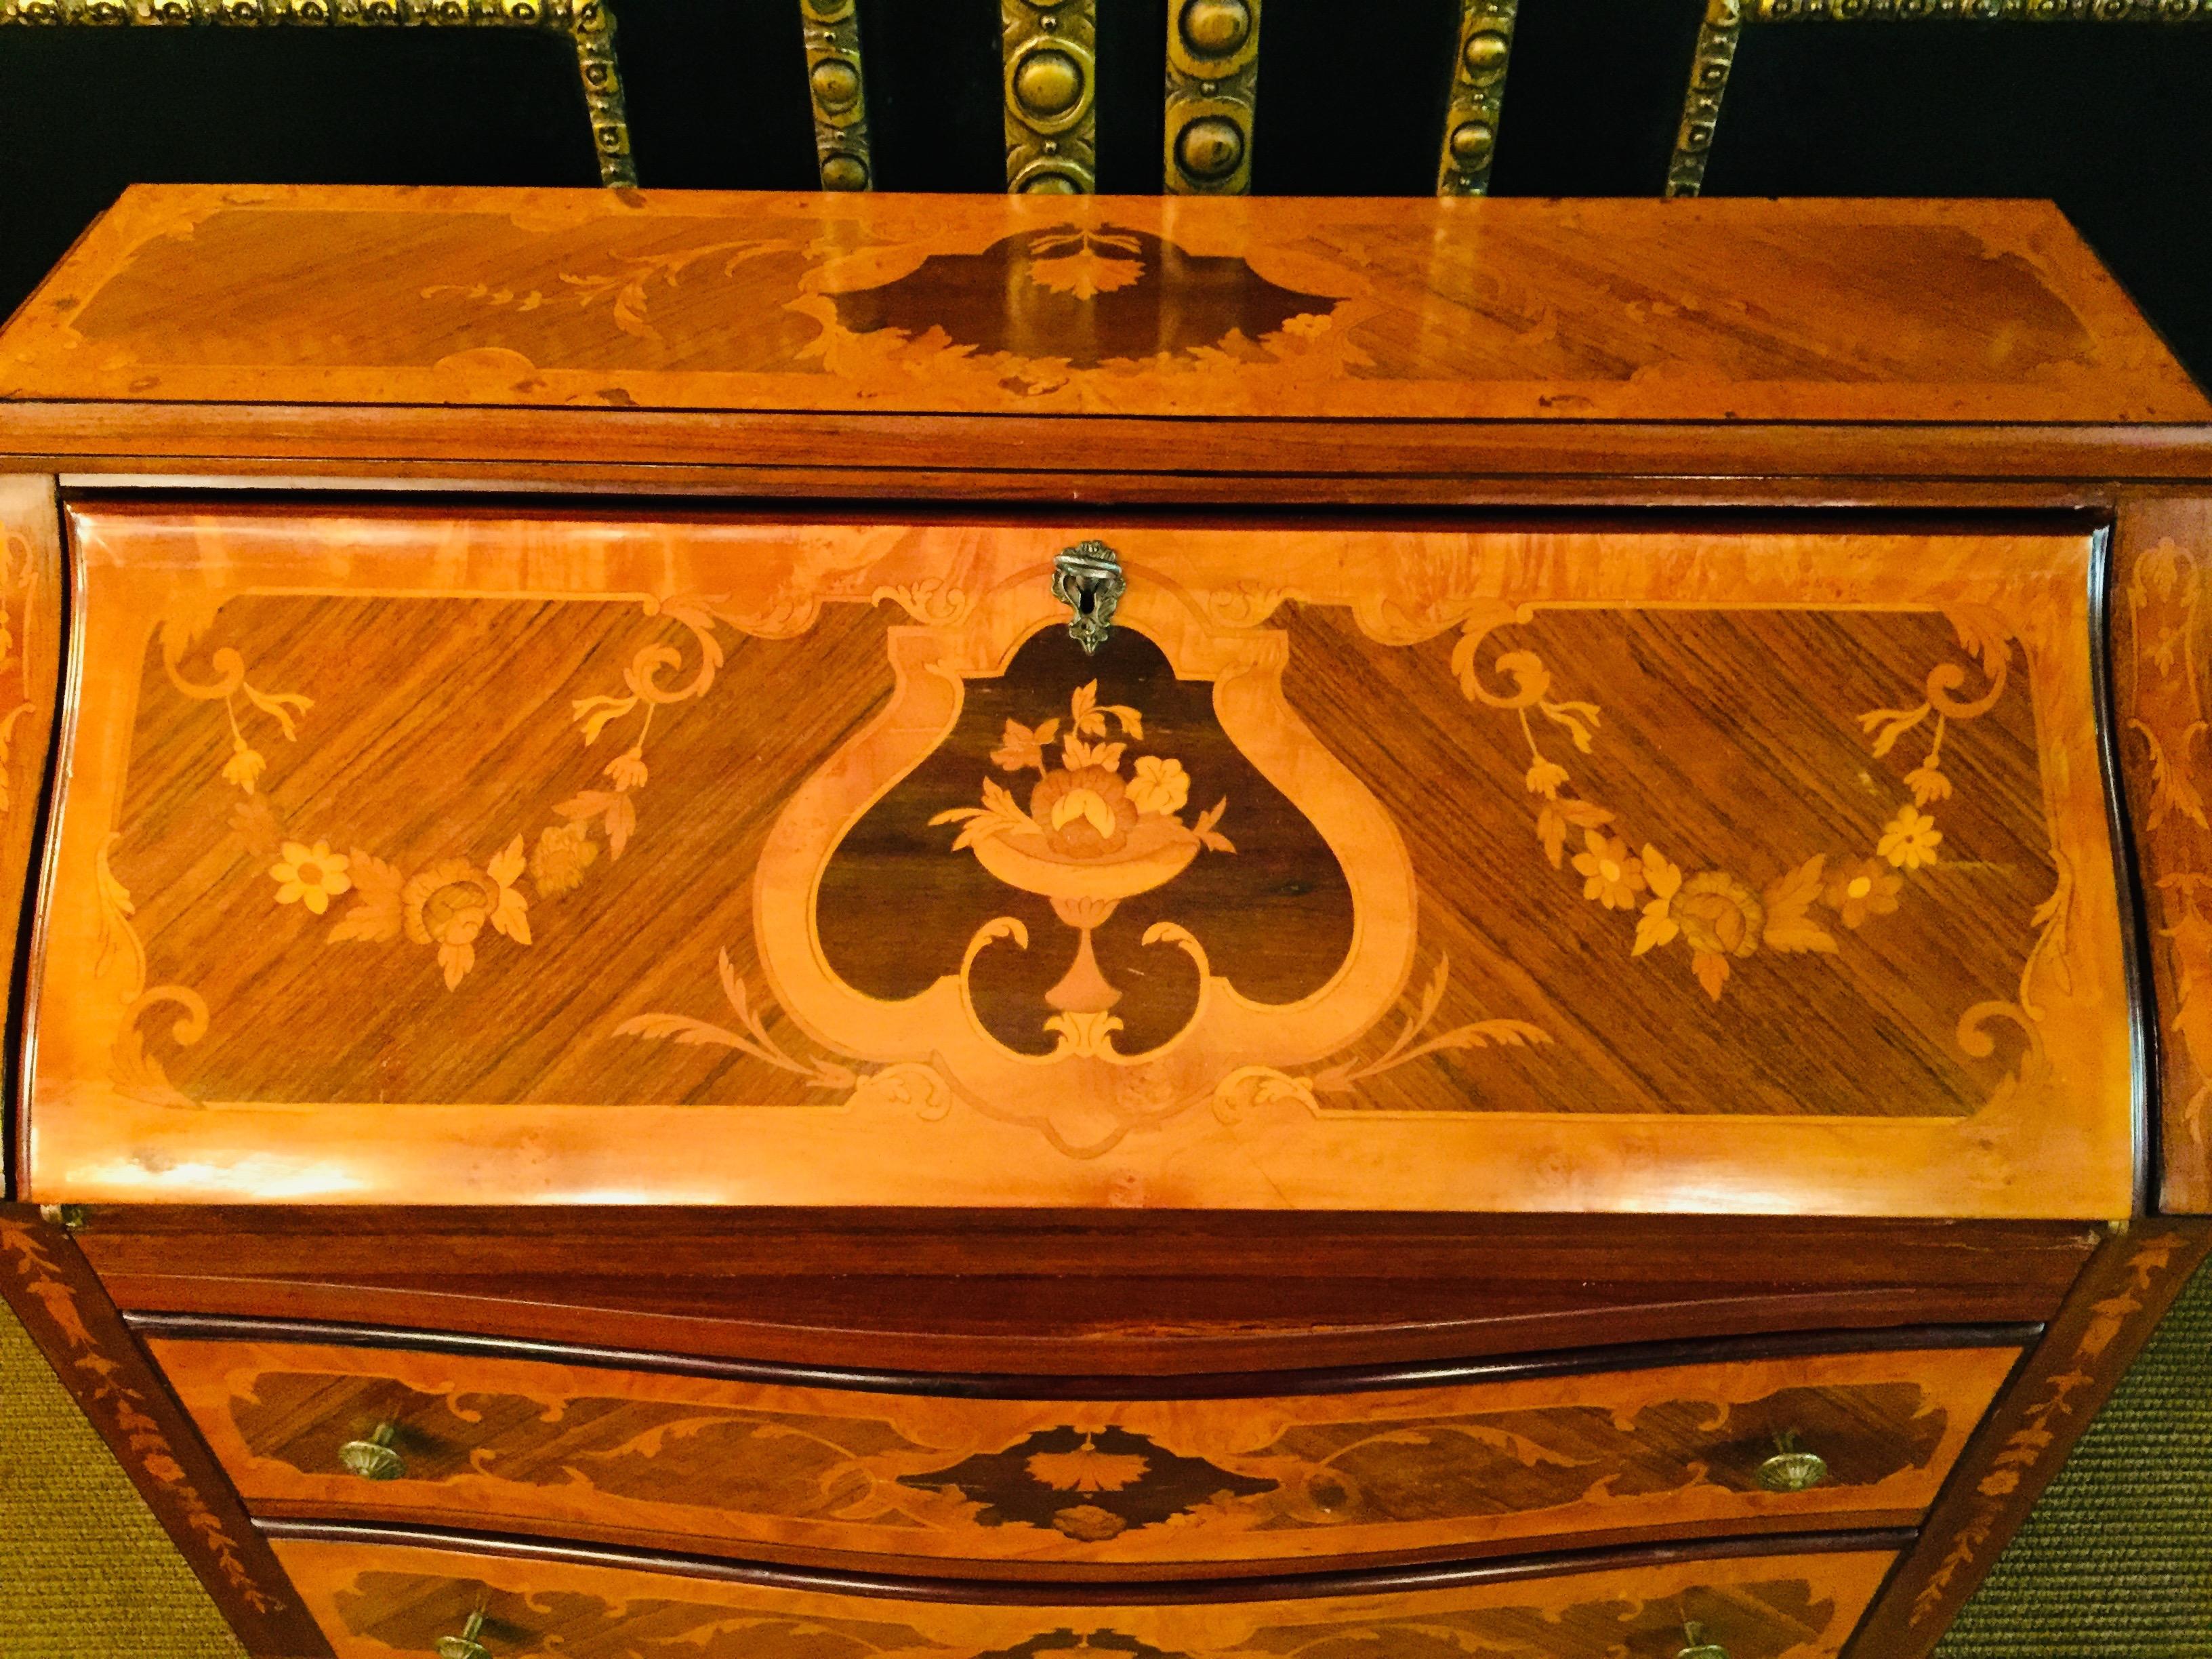 Italian Secretaire in Baroque Stil with Inlays Made in Italy